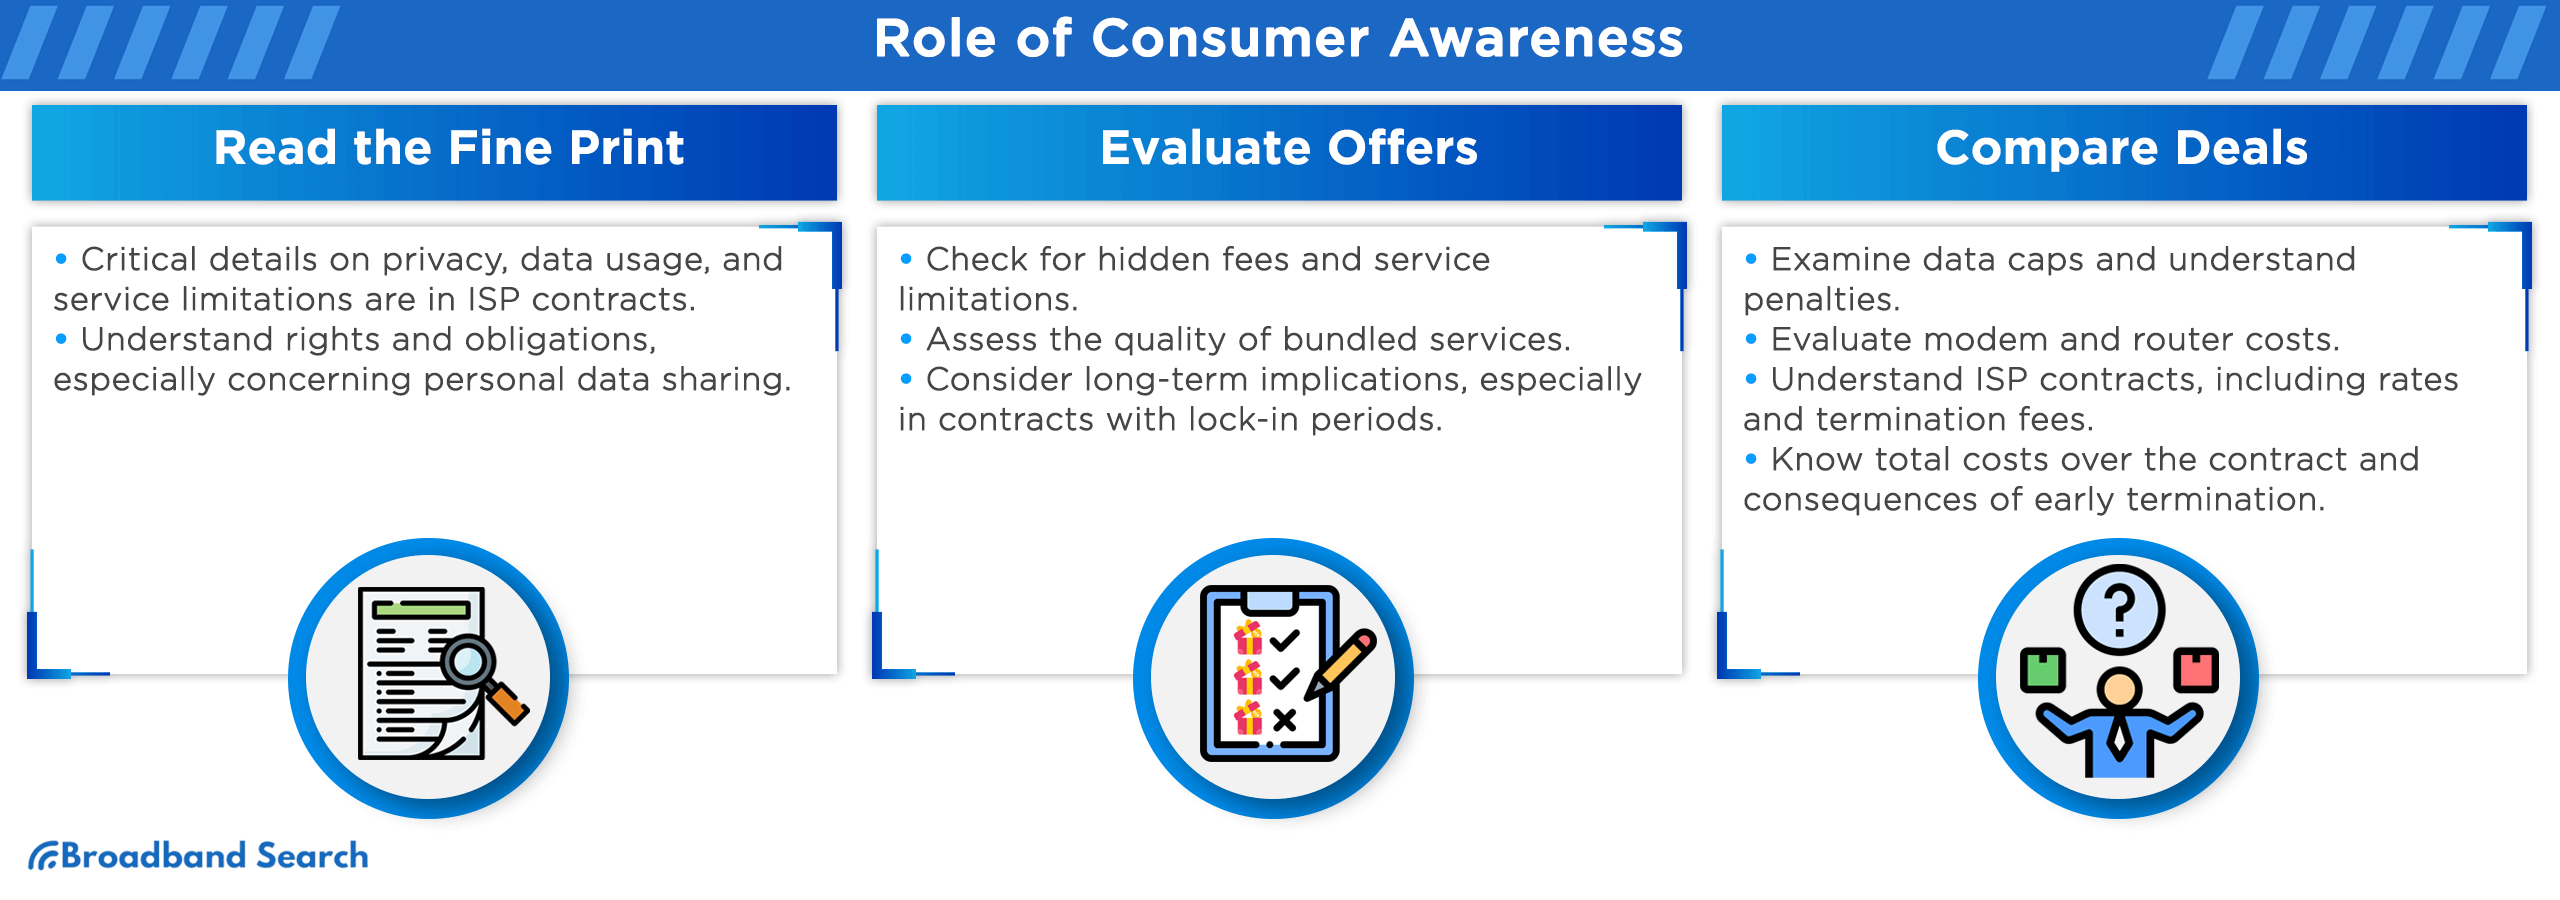 Role of consumer awareness